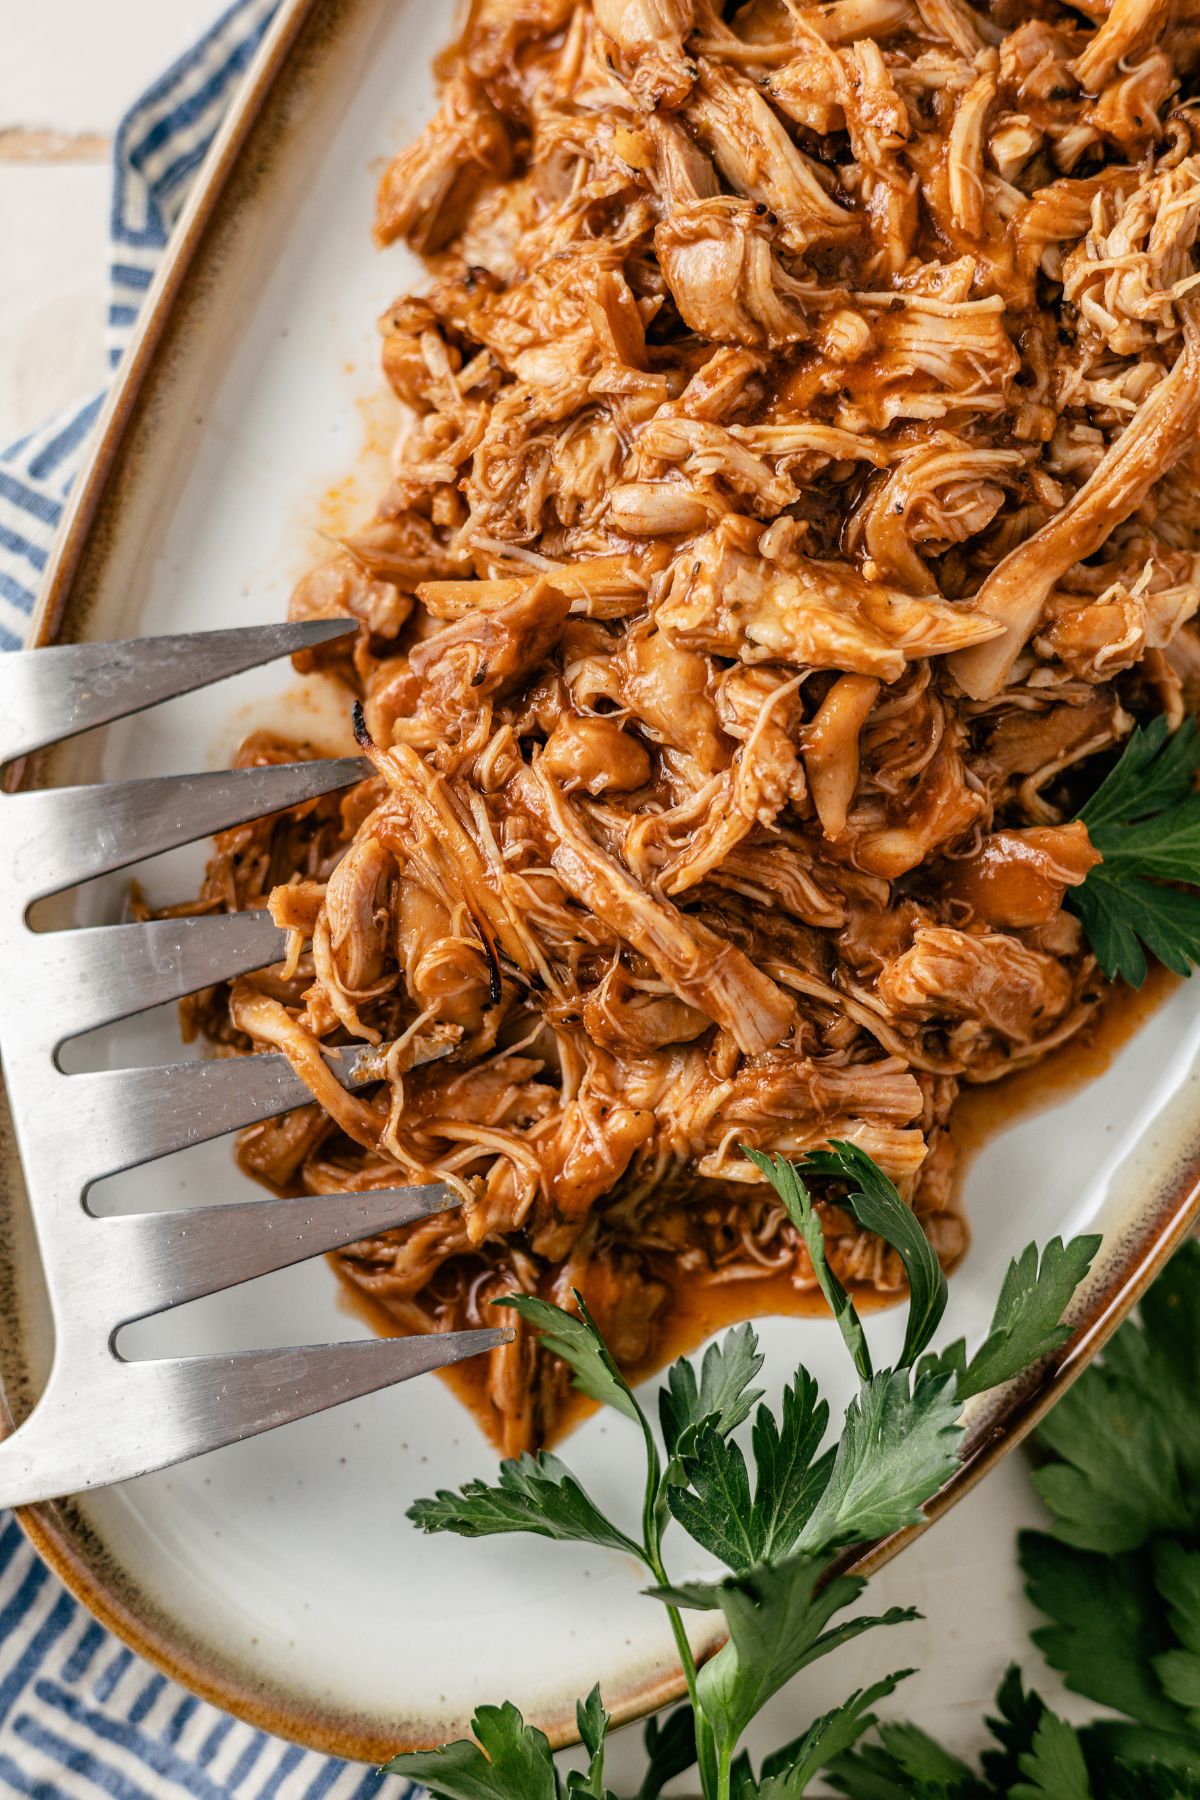 A large plate overflowing with succulent, pulled BBQ chicken, glistening in barbecue sauce, ready to be served.